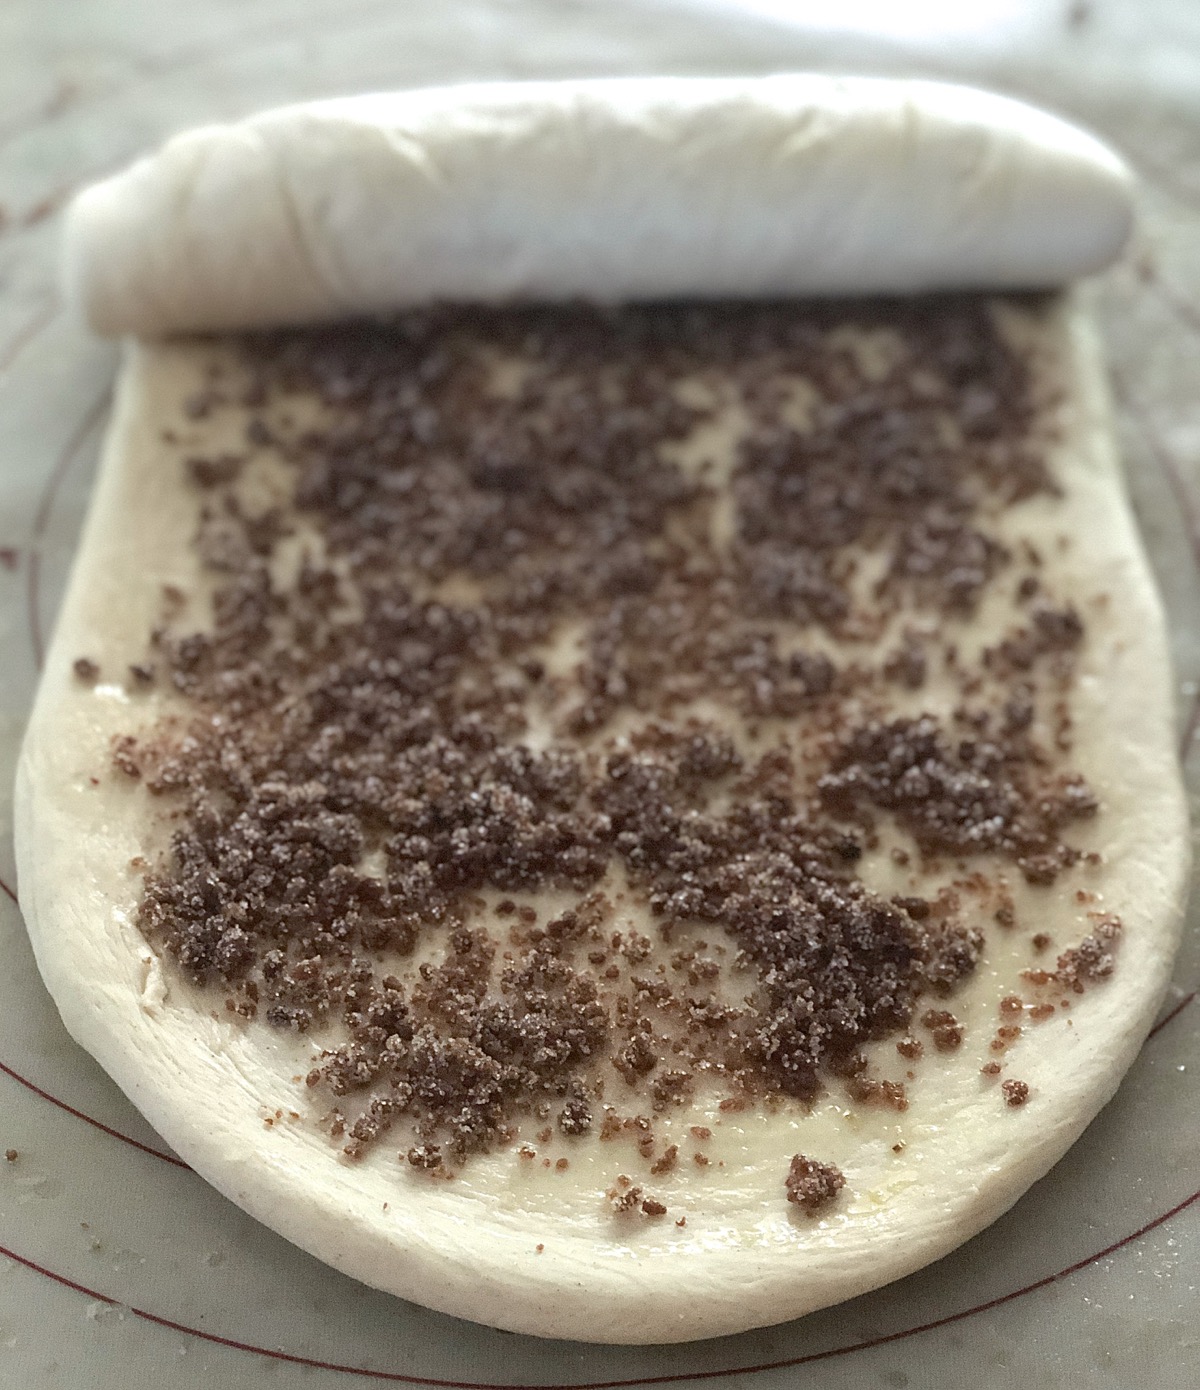 The dough for a cinnamon swirl loaf, sprinkled with filling and being rolled into a log.